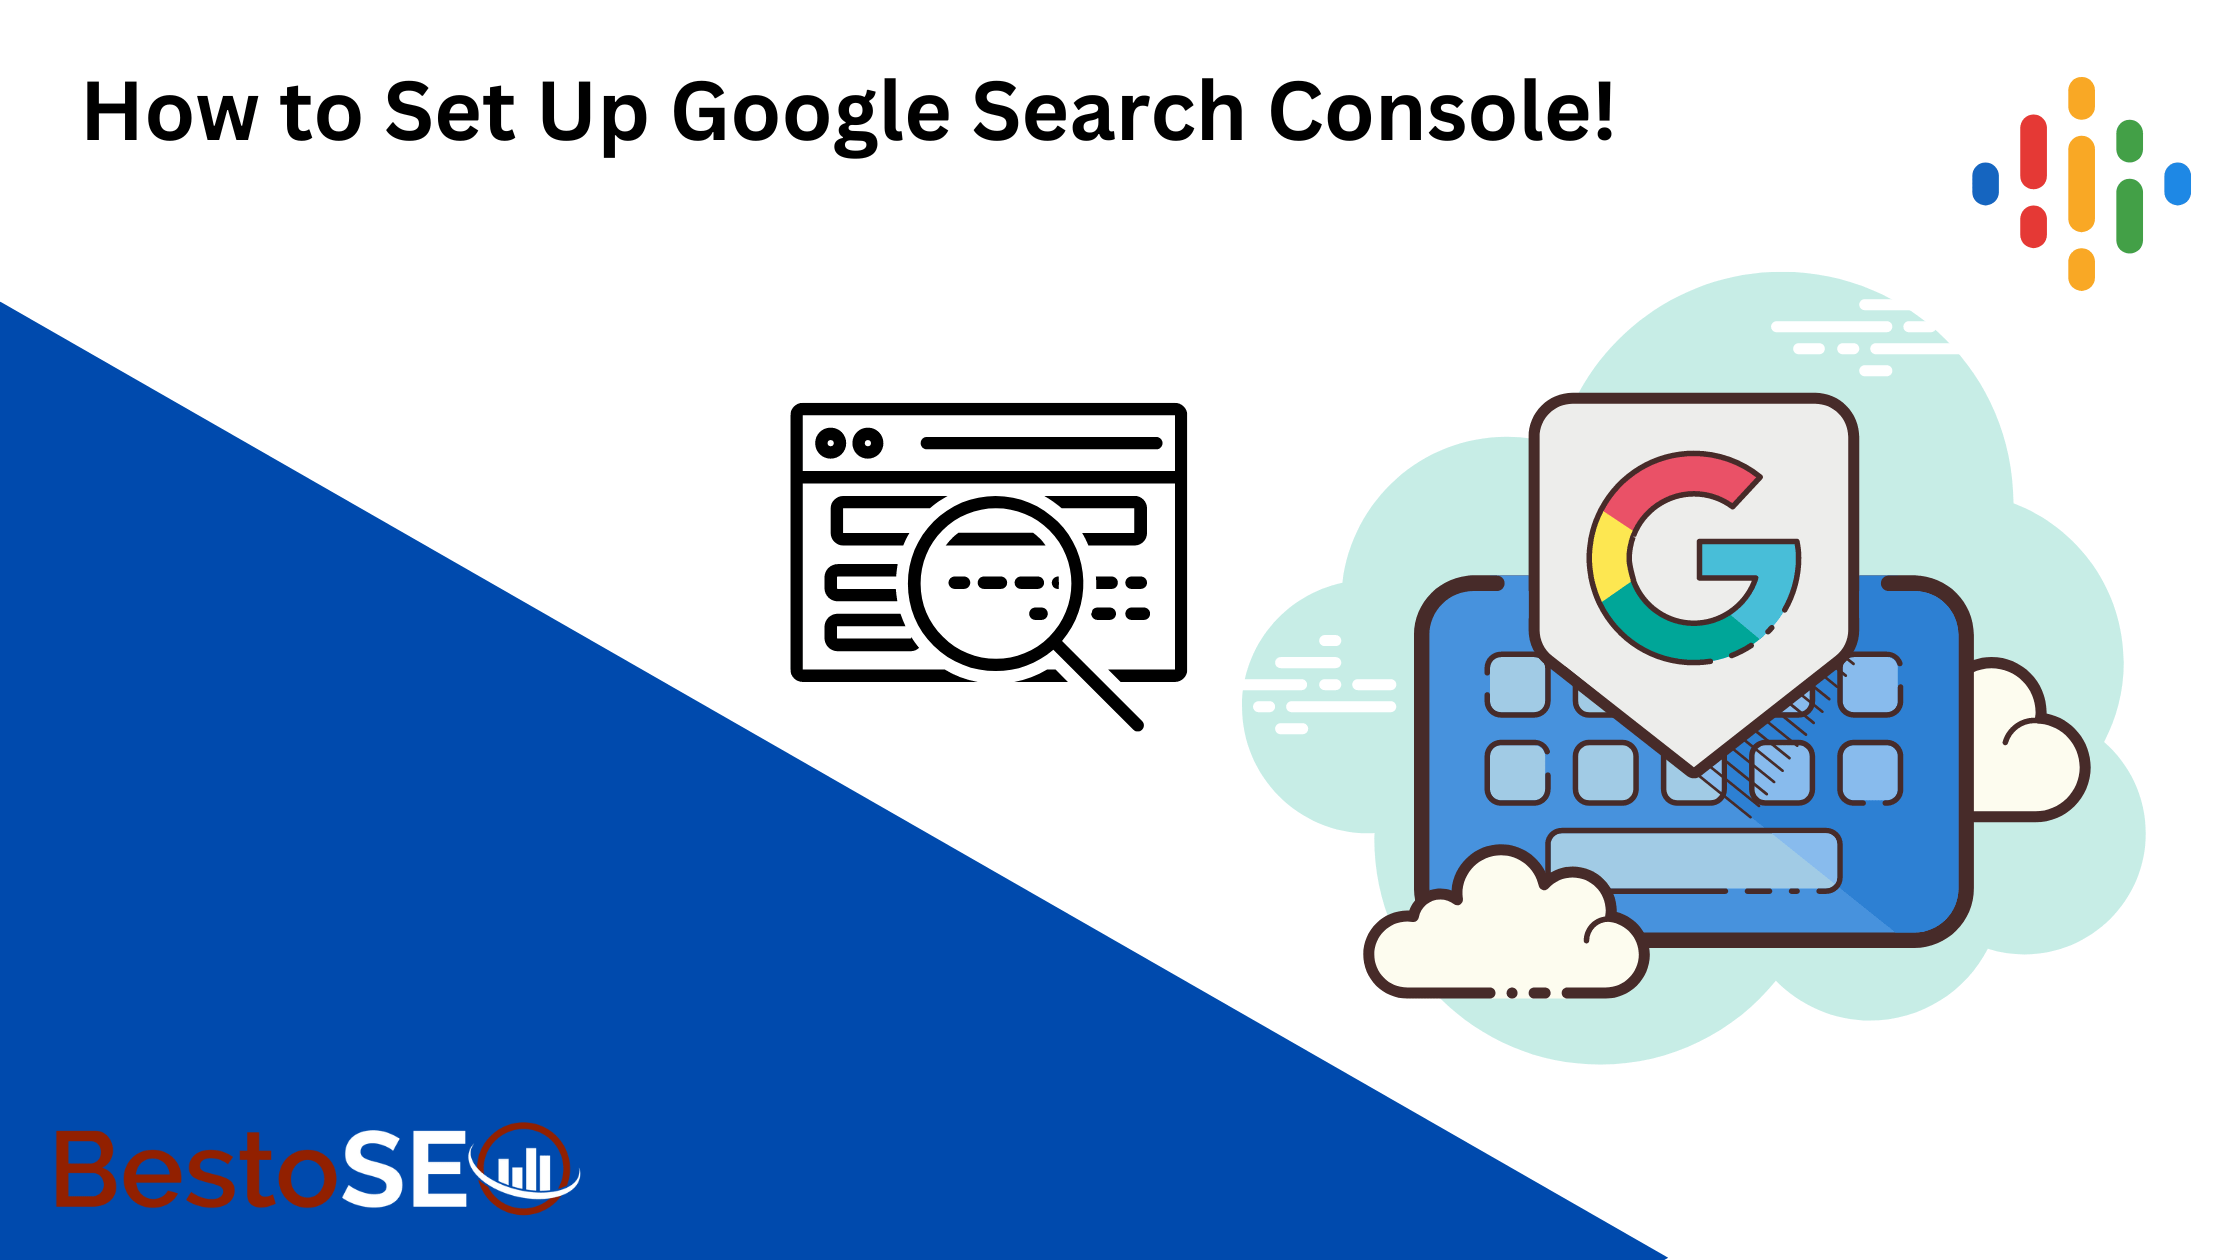 How to Set Up Google Search Console!